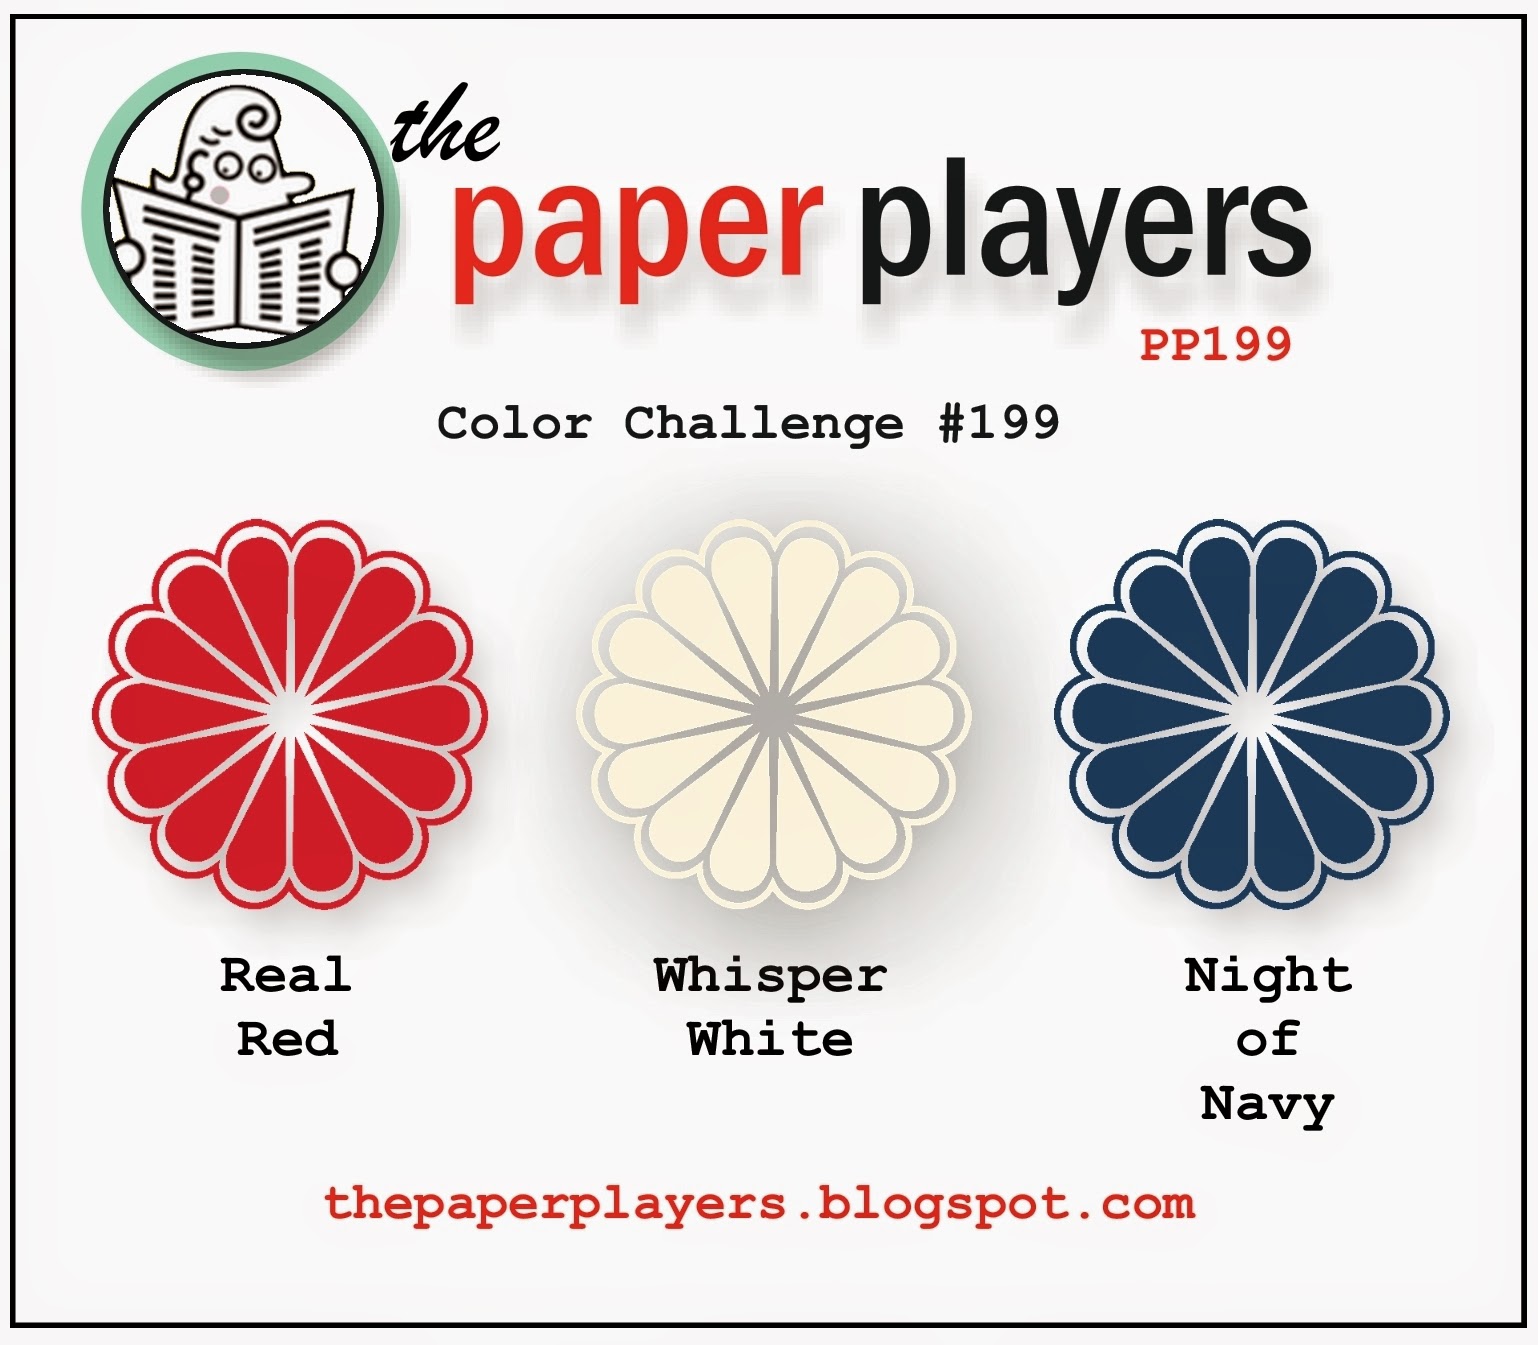 Playing paper